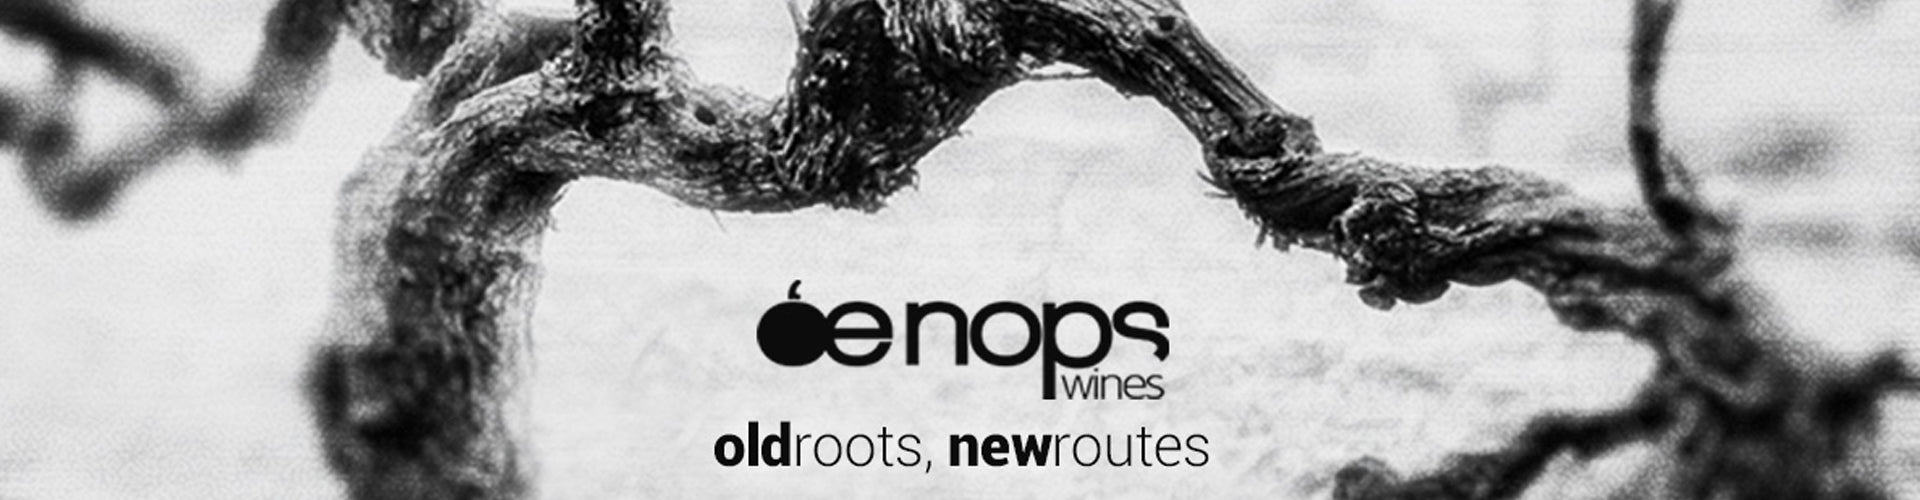 Oenops Wines Collection Logo